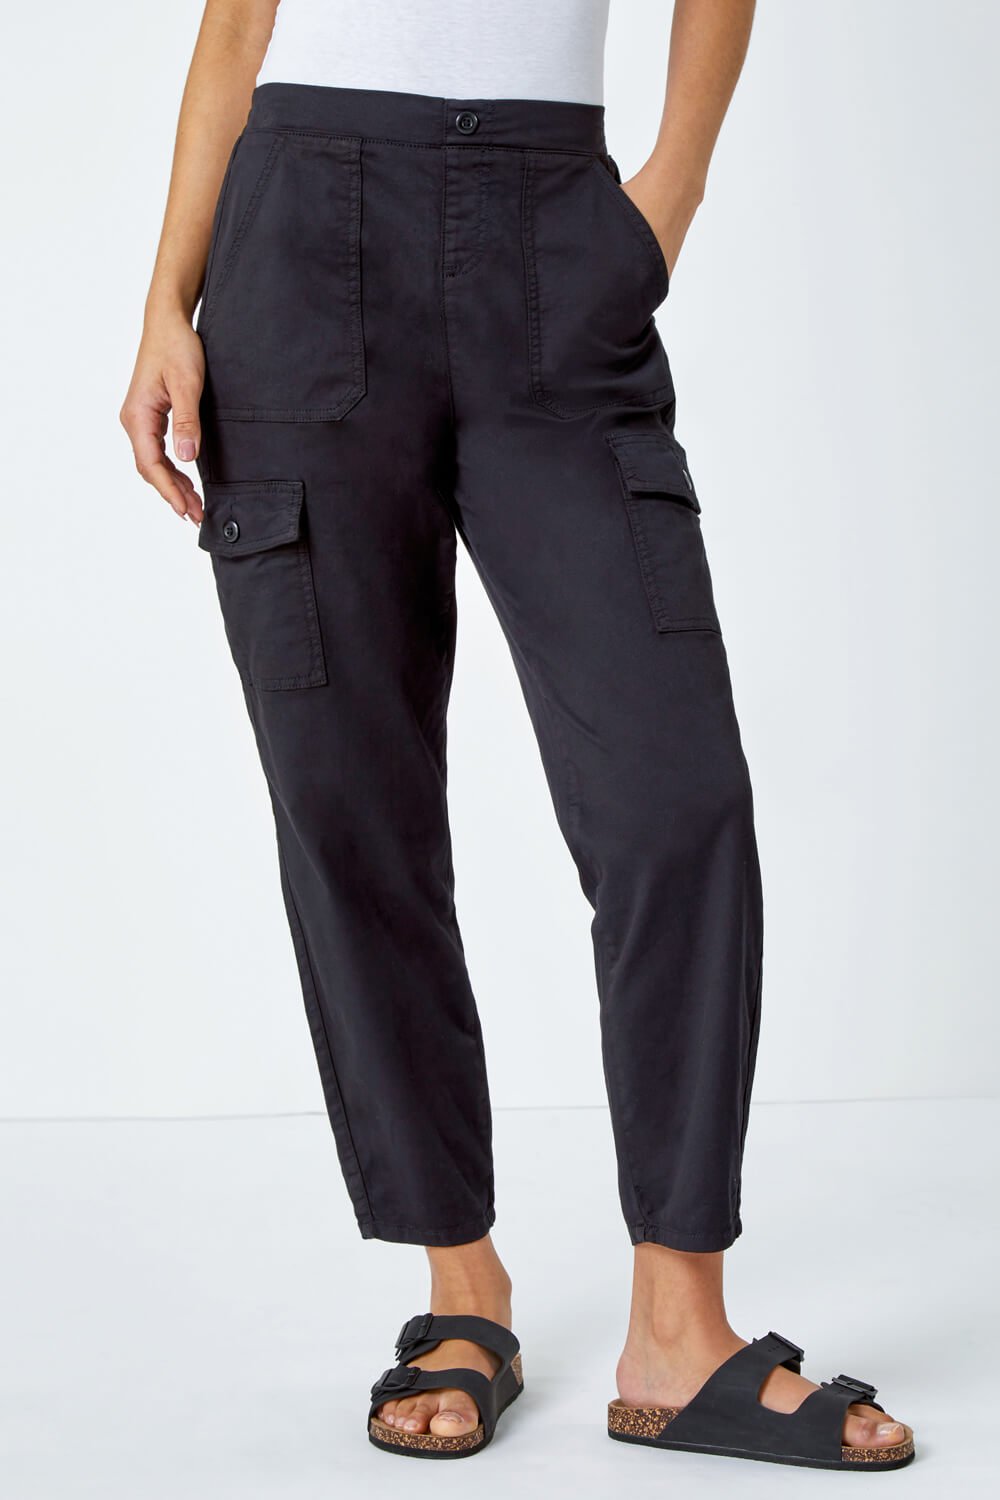 Black Casual Cargo Stretch Trousers, Image 4 of 5